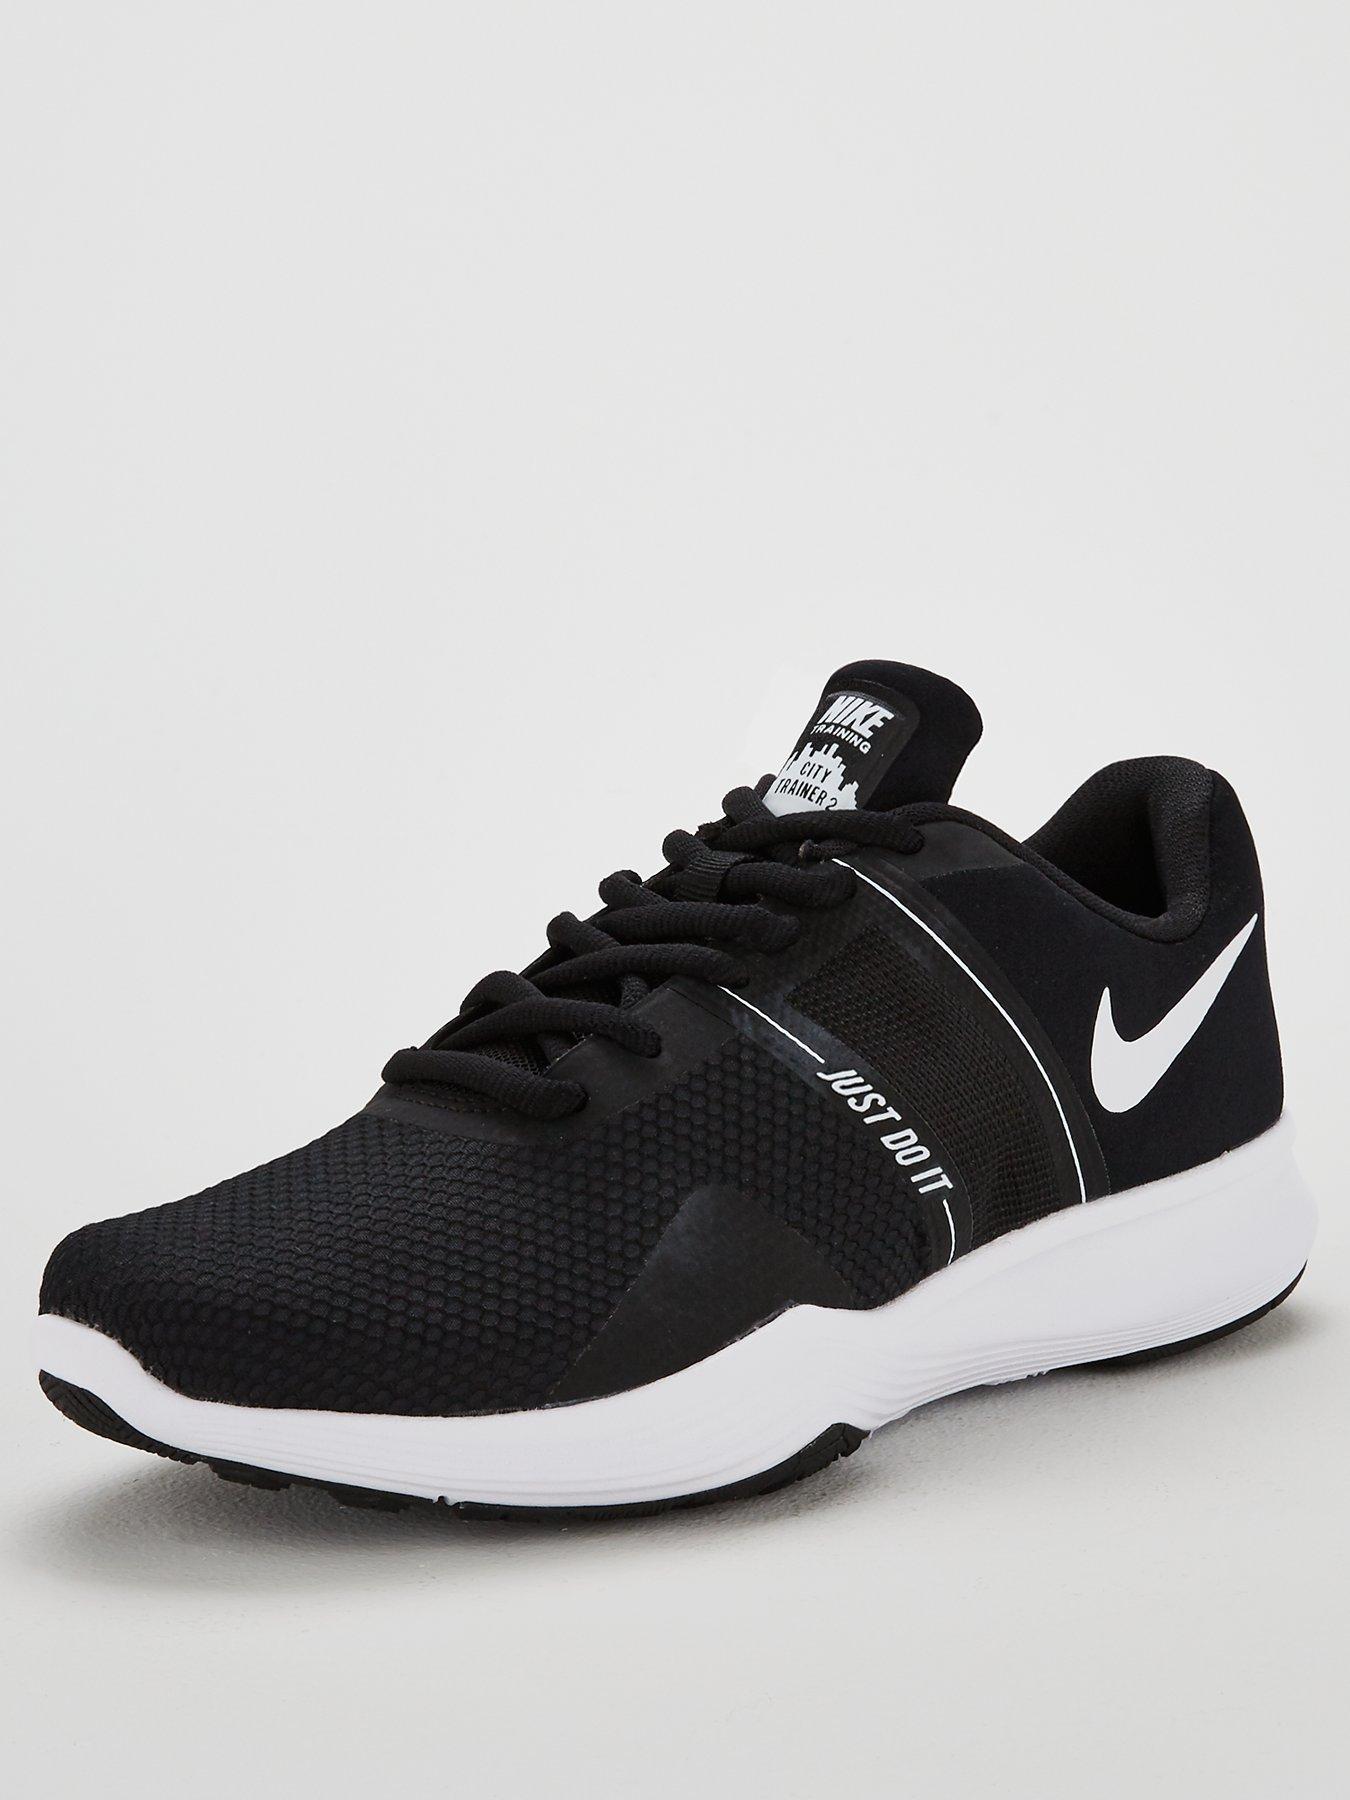 women's nike just do it trainers